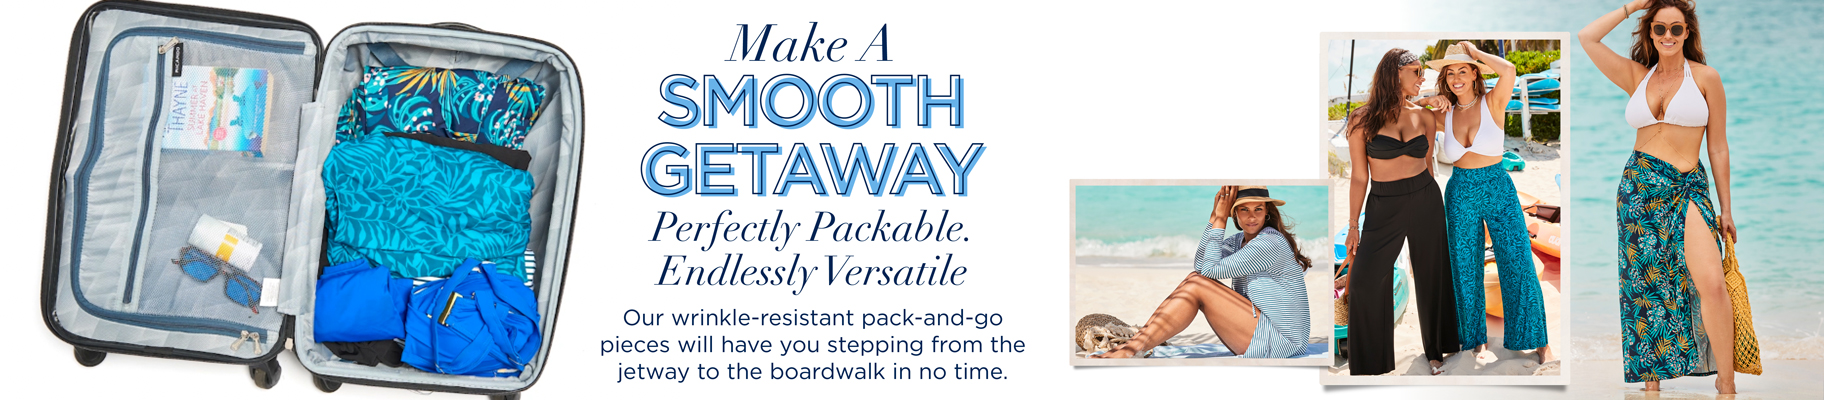 Our wrinkle-resistant pack-and-go pieces will have you stepping from the jetway to the boardwalk in no time.